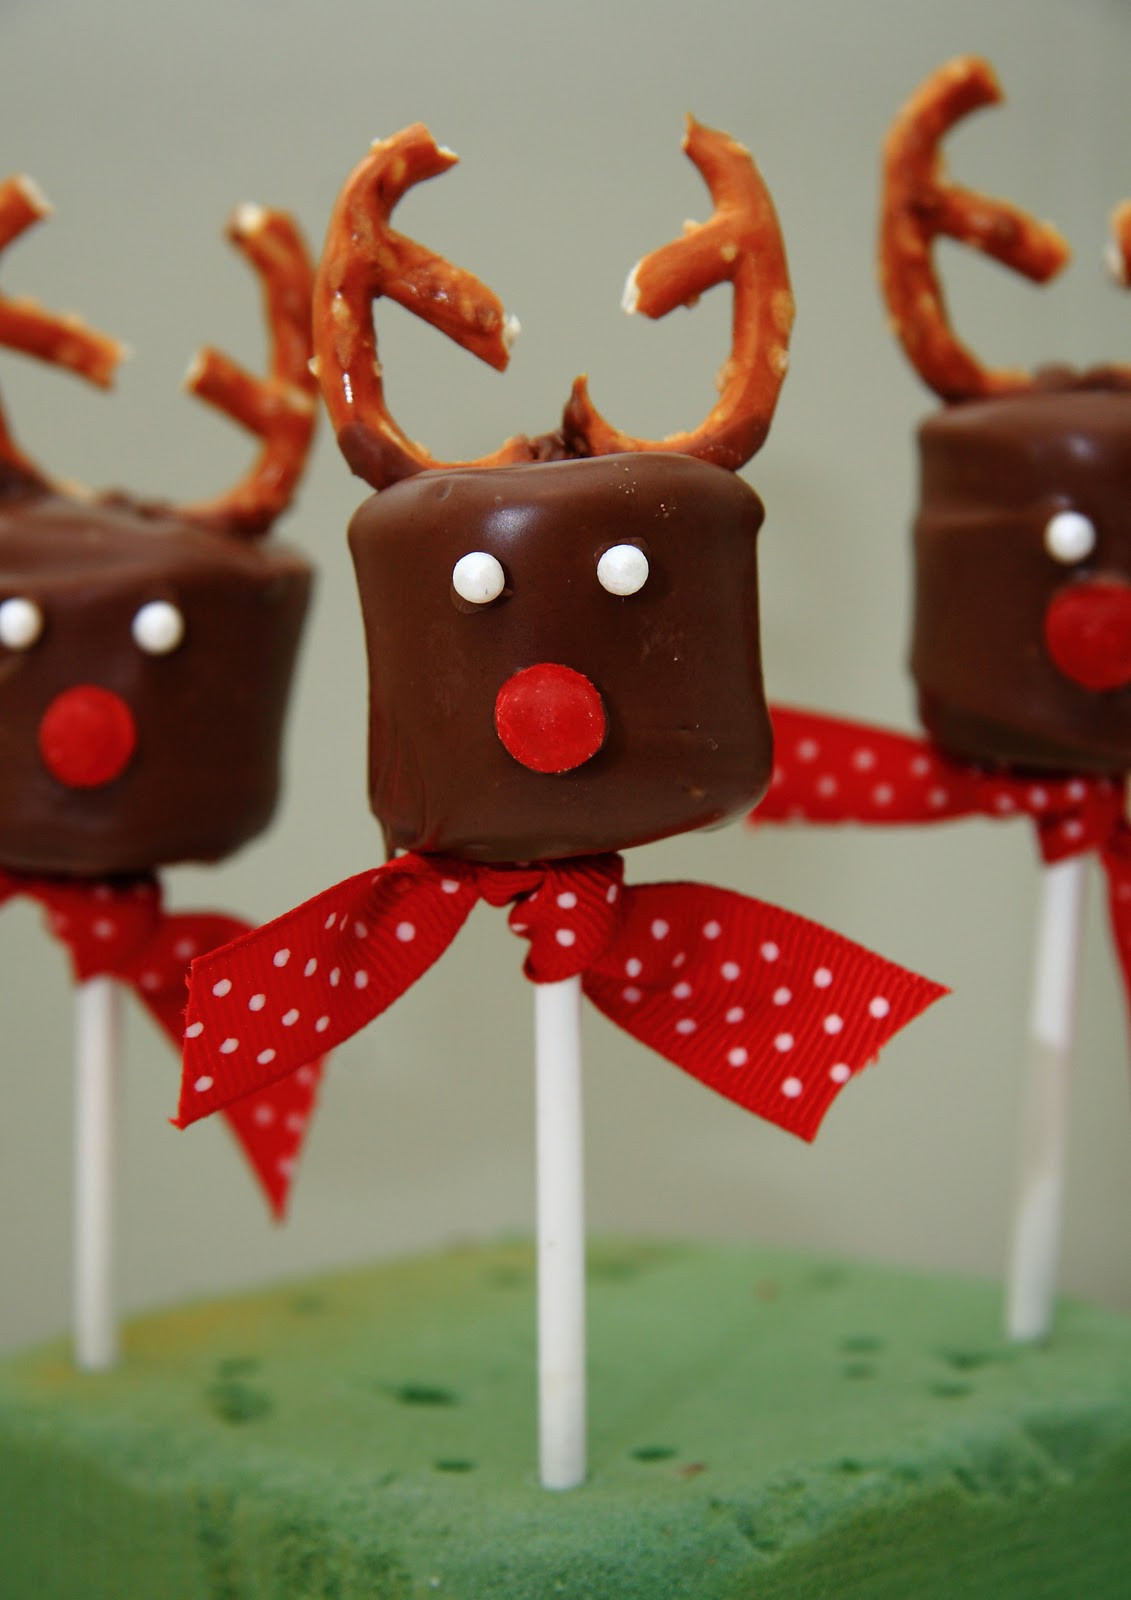 Toddler Christmas Party Ideas
 21 Amazing Christmas Party Ideas for Kids